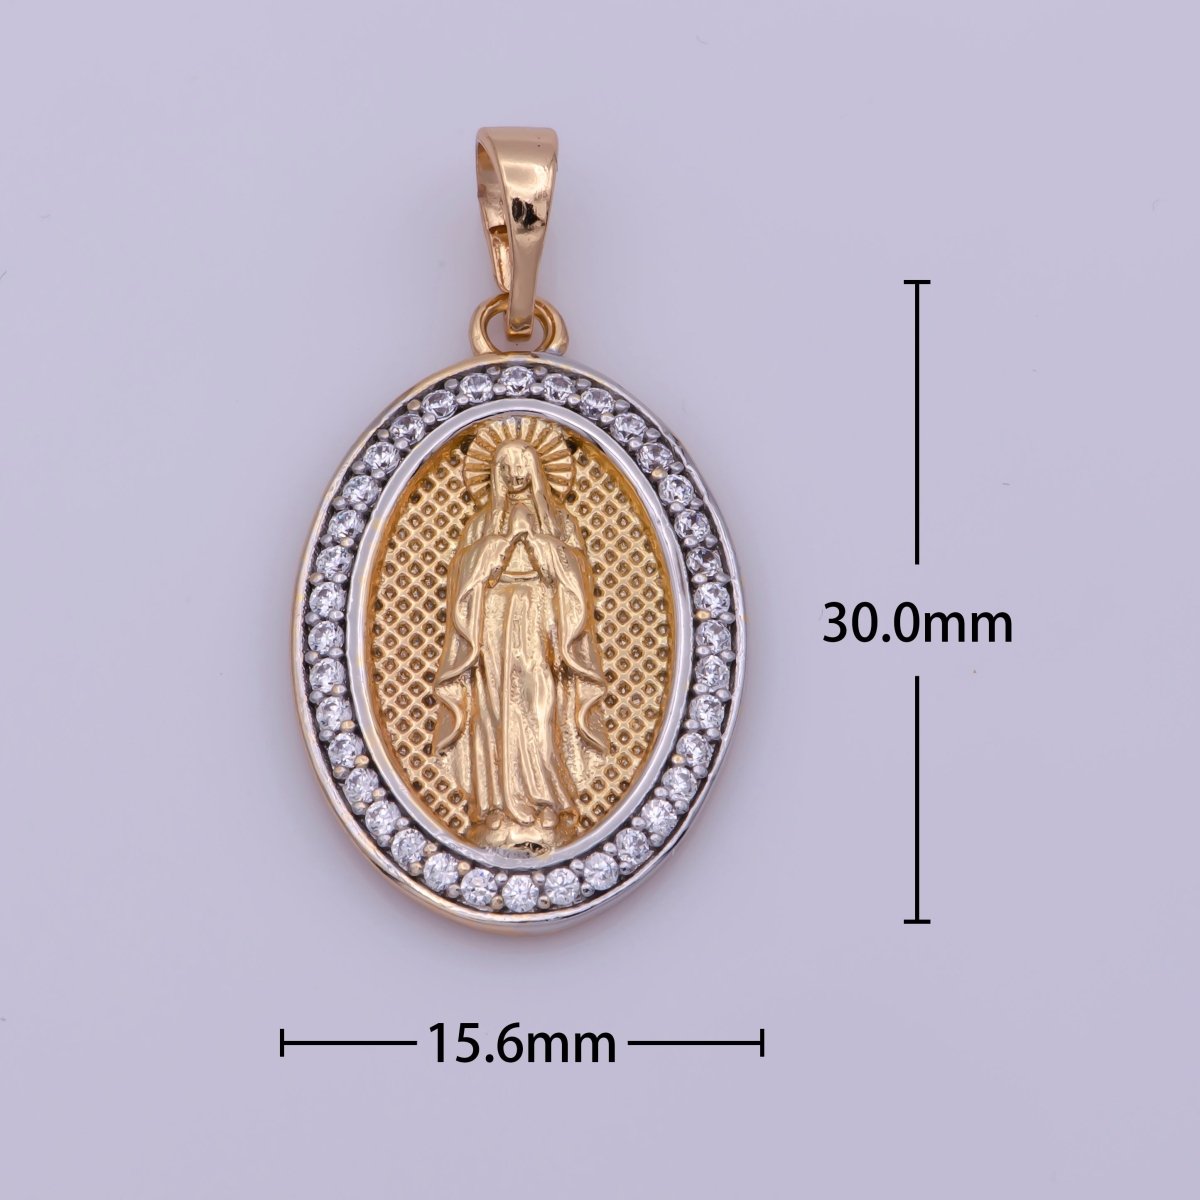 18k Gold Filled Virgin Mary Pendant, Virgin of Guadalupe, Our Lady Guadalupe, Religious / Dije de Guadalupe Medallion Charm N-1447 - DLUXCA